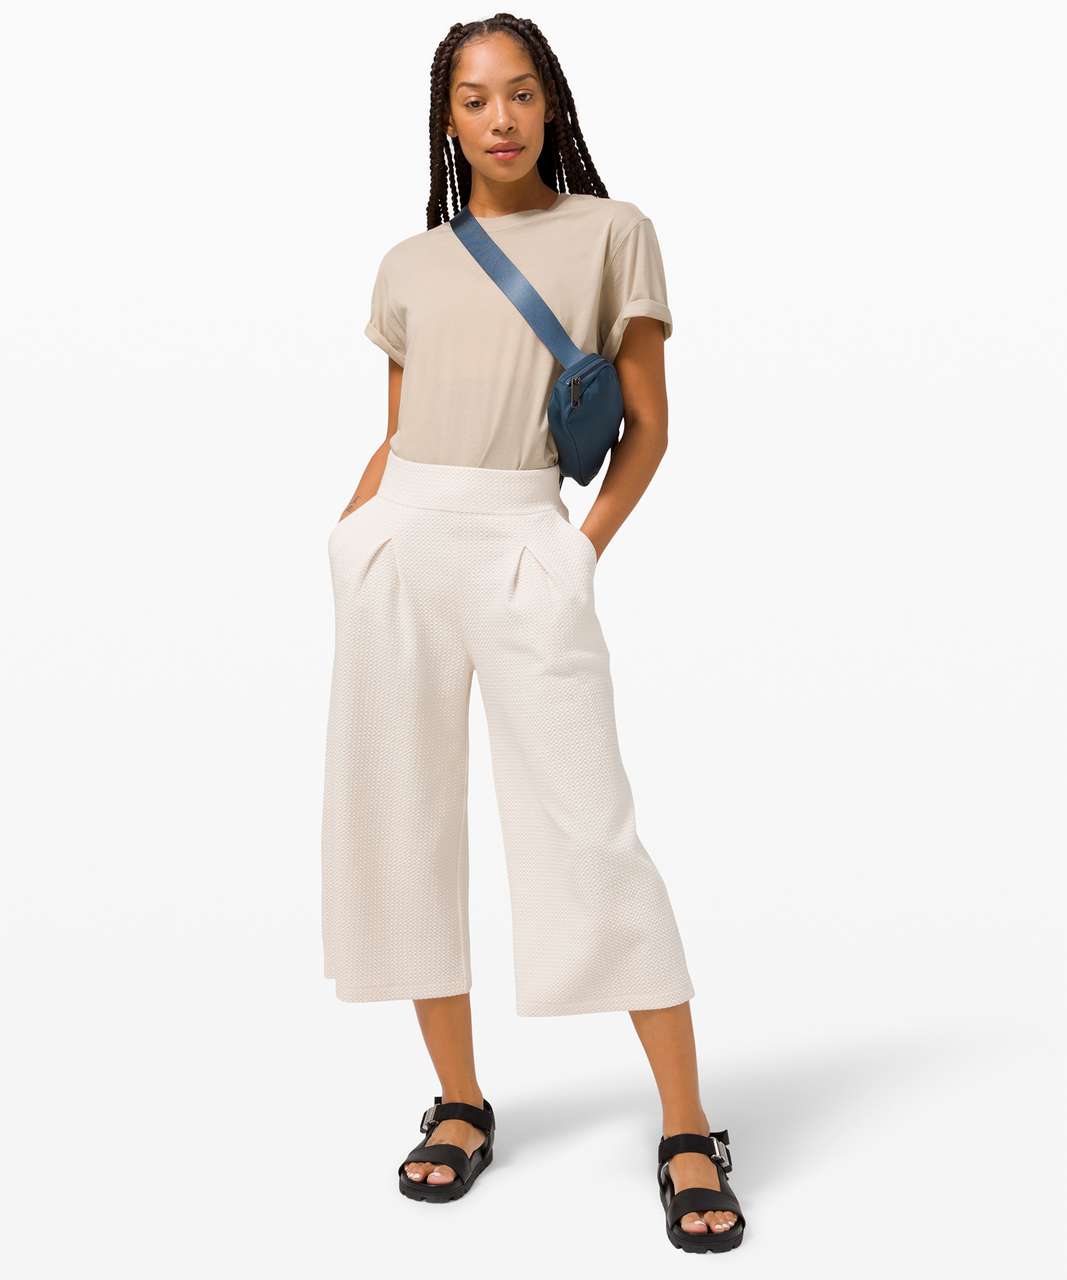 Lululemon Can You Feel The Pleat Crop - Light Ivory